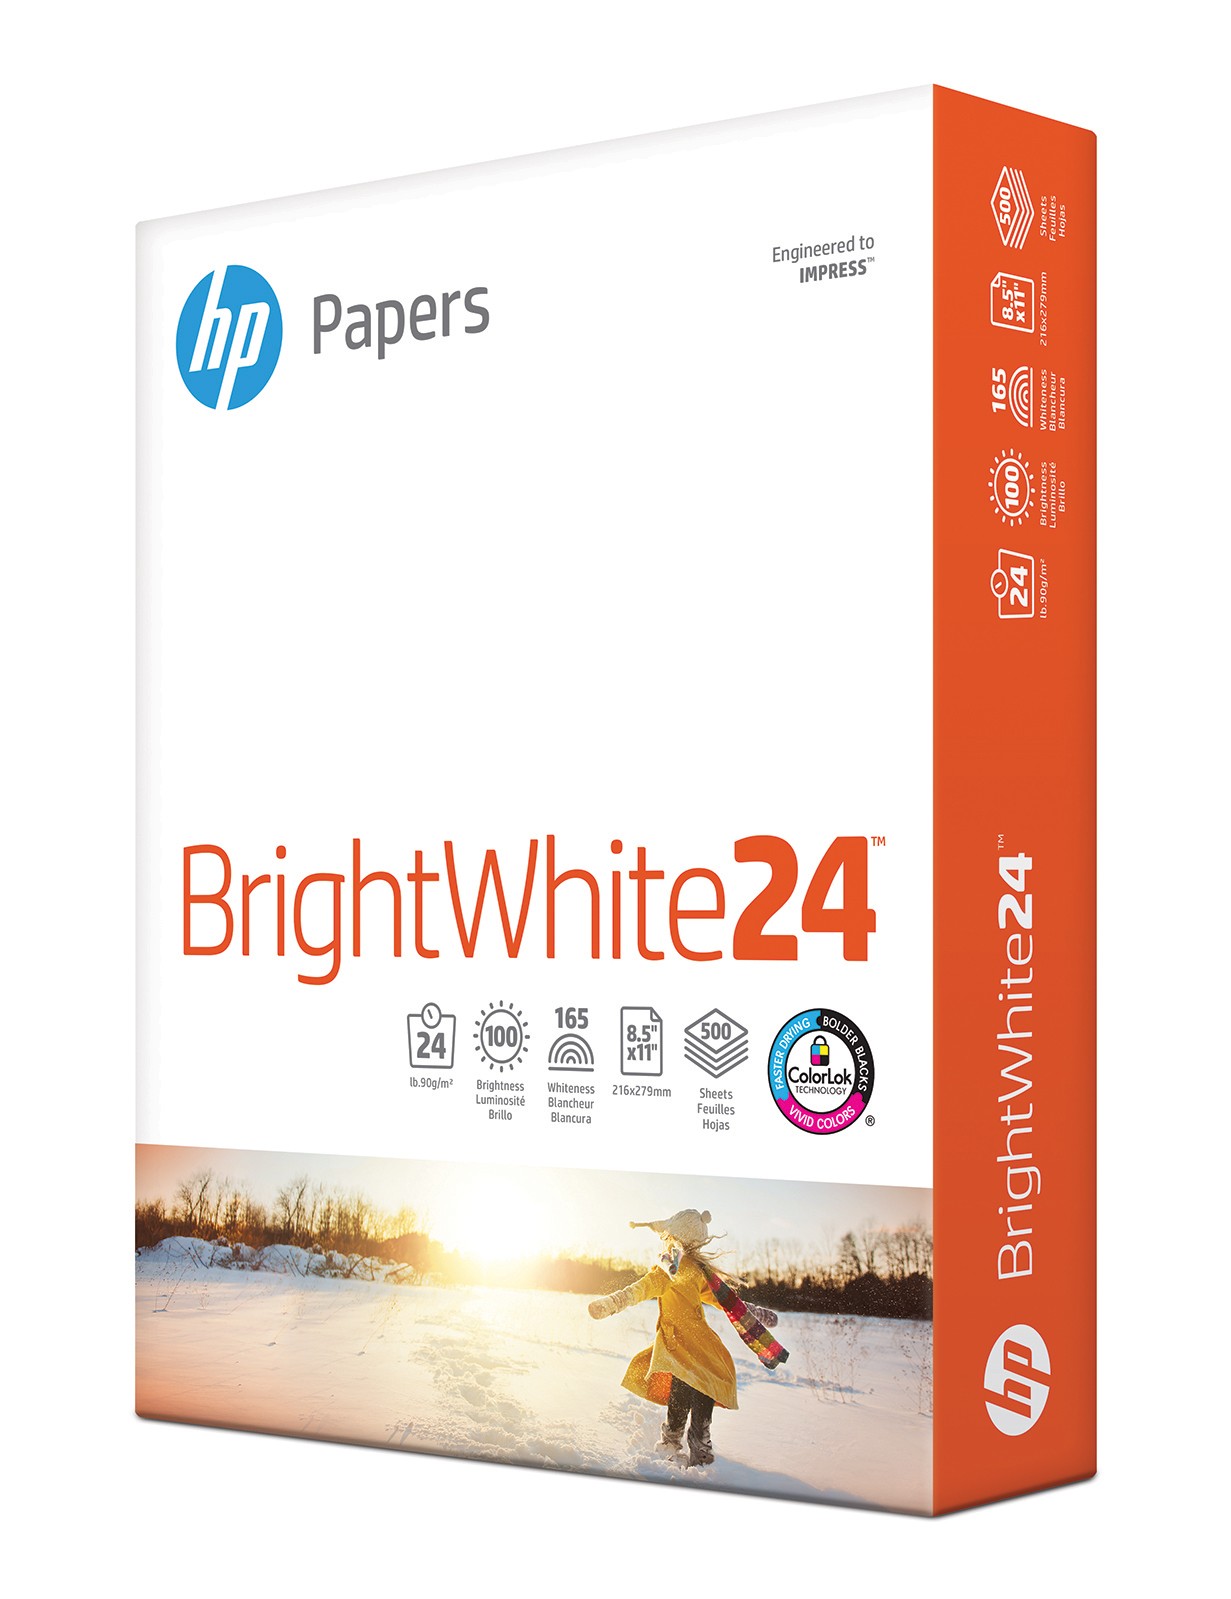 HP All In One22 Printer Copier Paper Letter Size 8 12 x 11 Ream Of